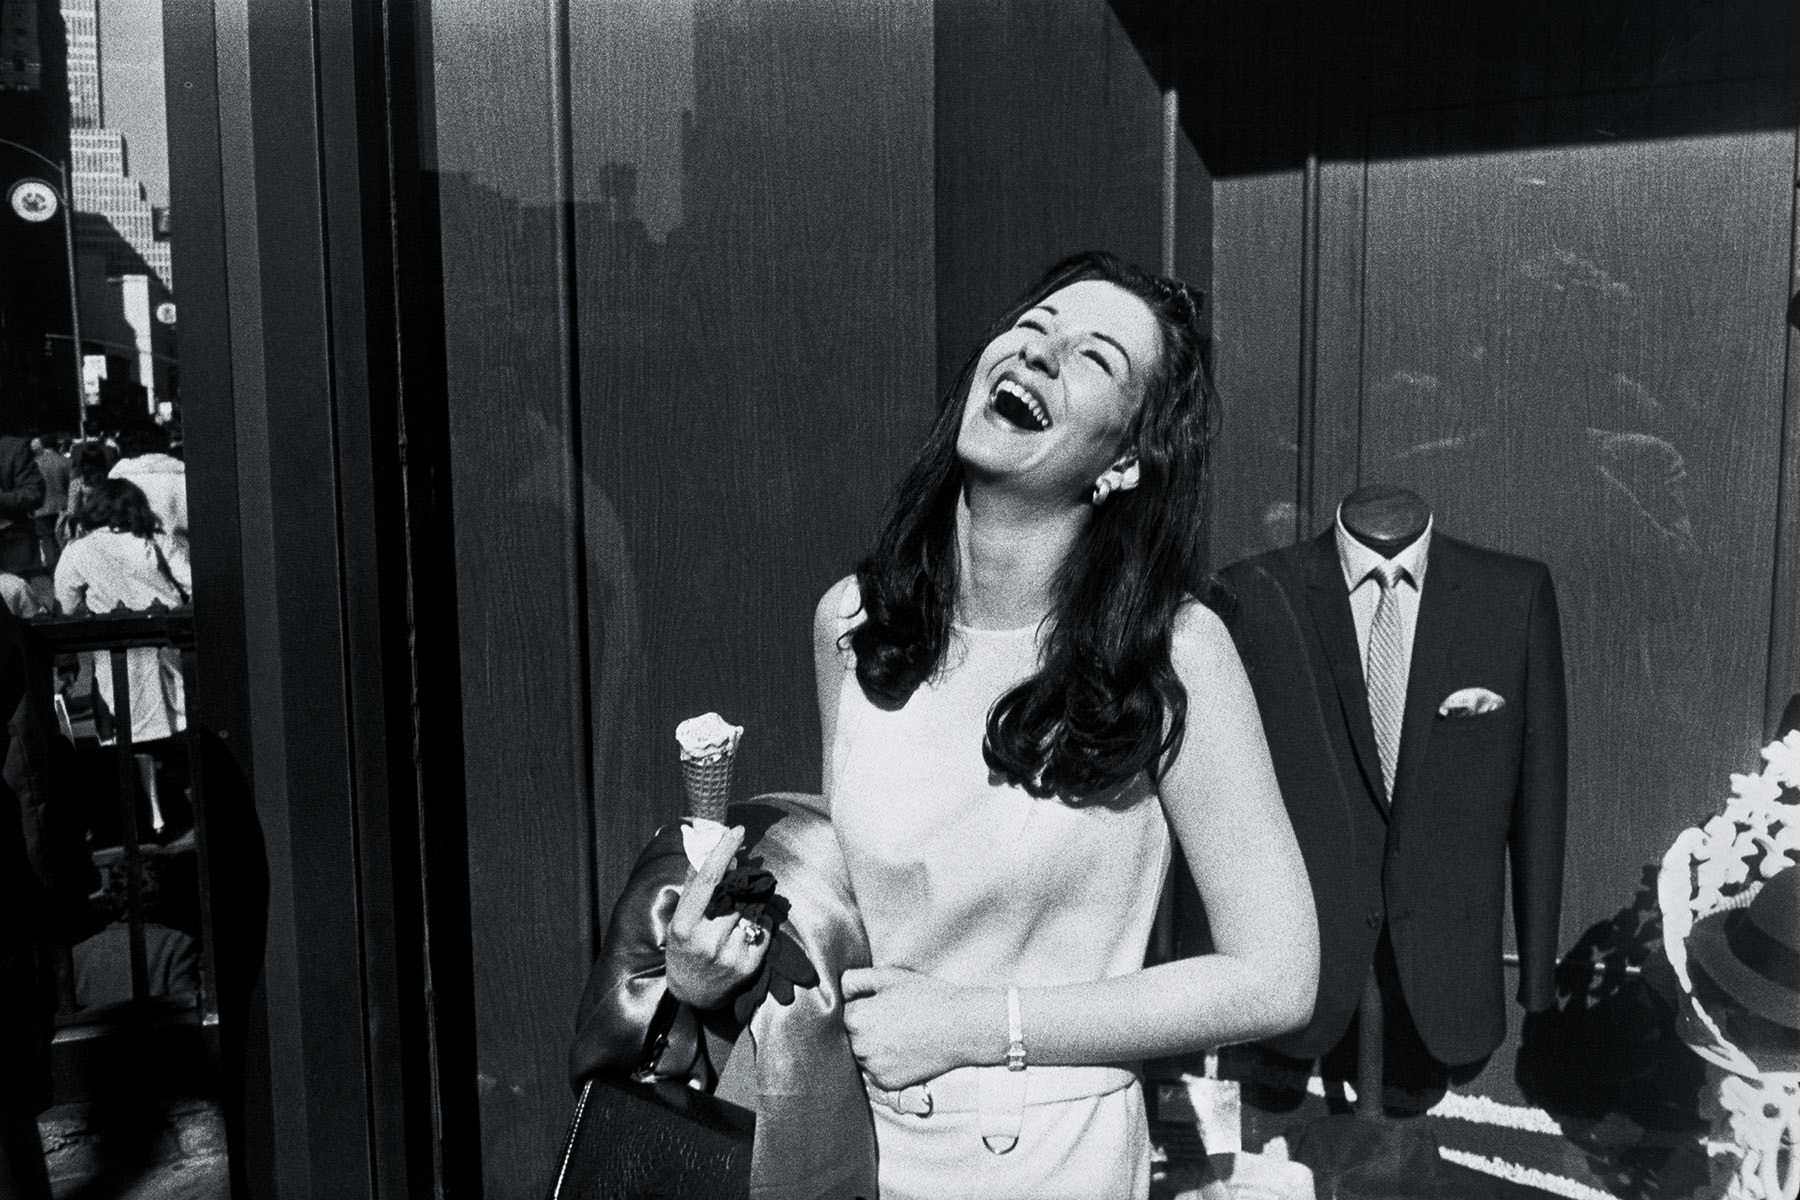 Garry Winogrand Is The Forgotten Photographer Behind These Iconic